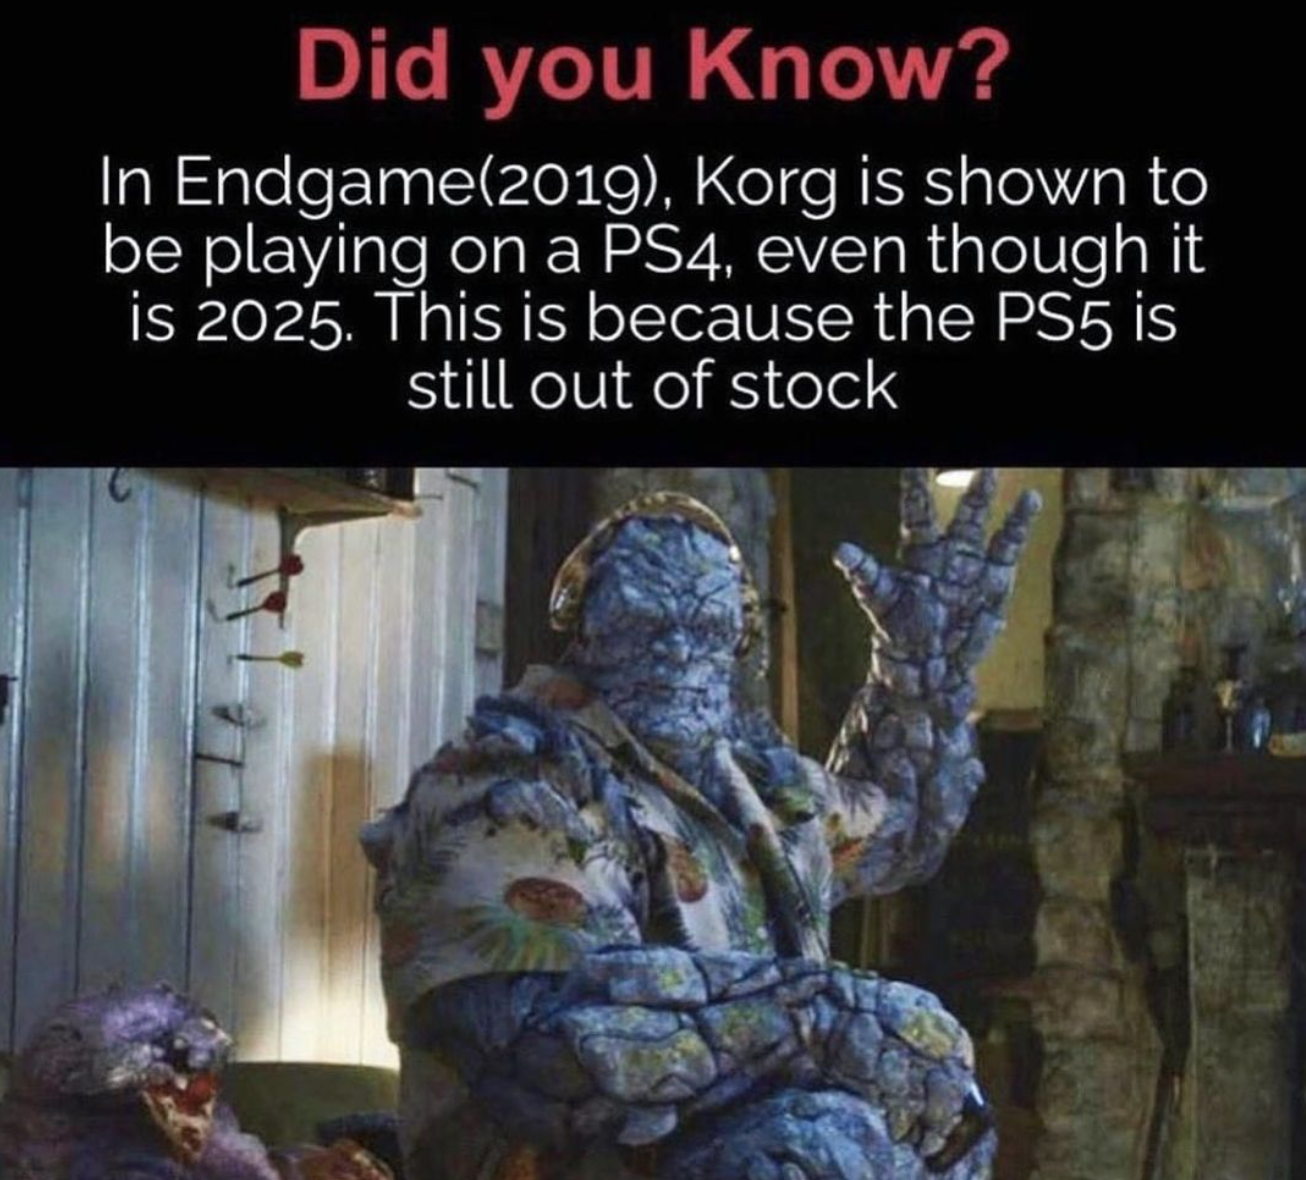 funny gaming memes - avengers endgame korg - Did you know? In Endgame2019, Korg is shown to be playing on a PS4, even though it is 2025. This is because the PS5 is still out of stock